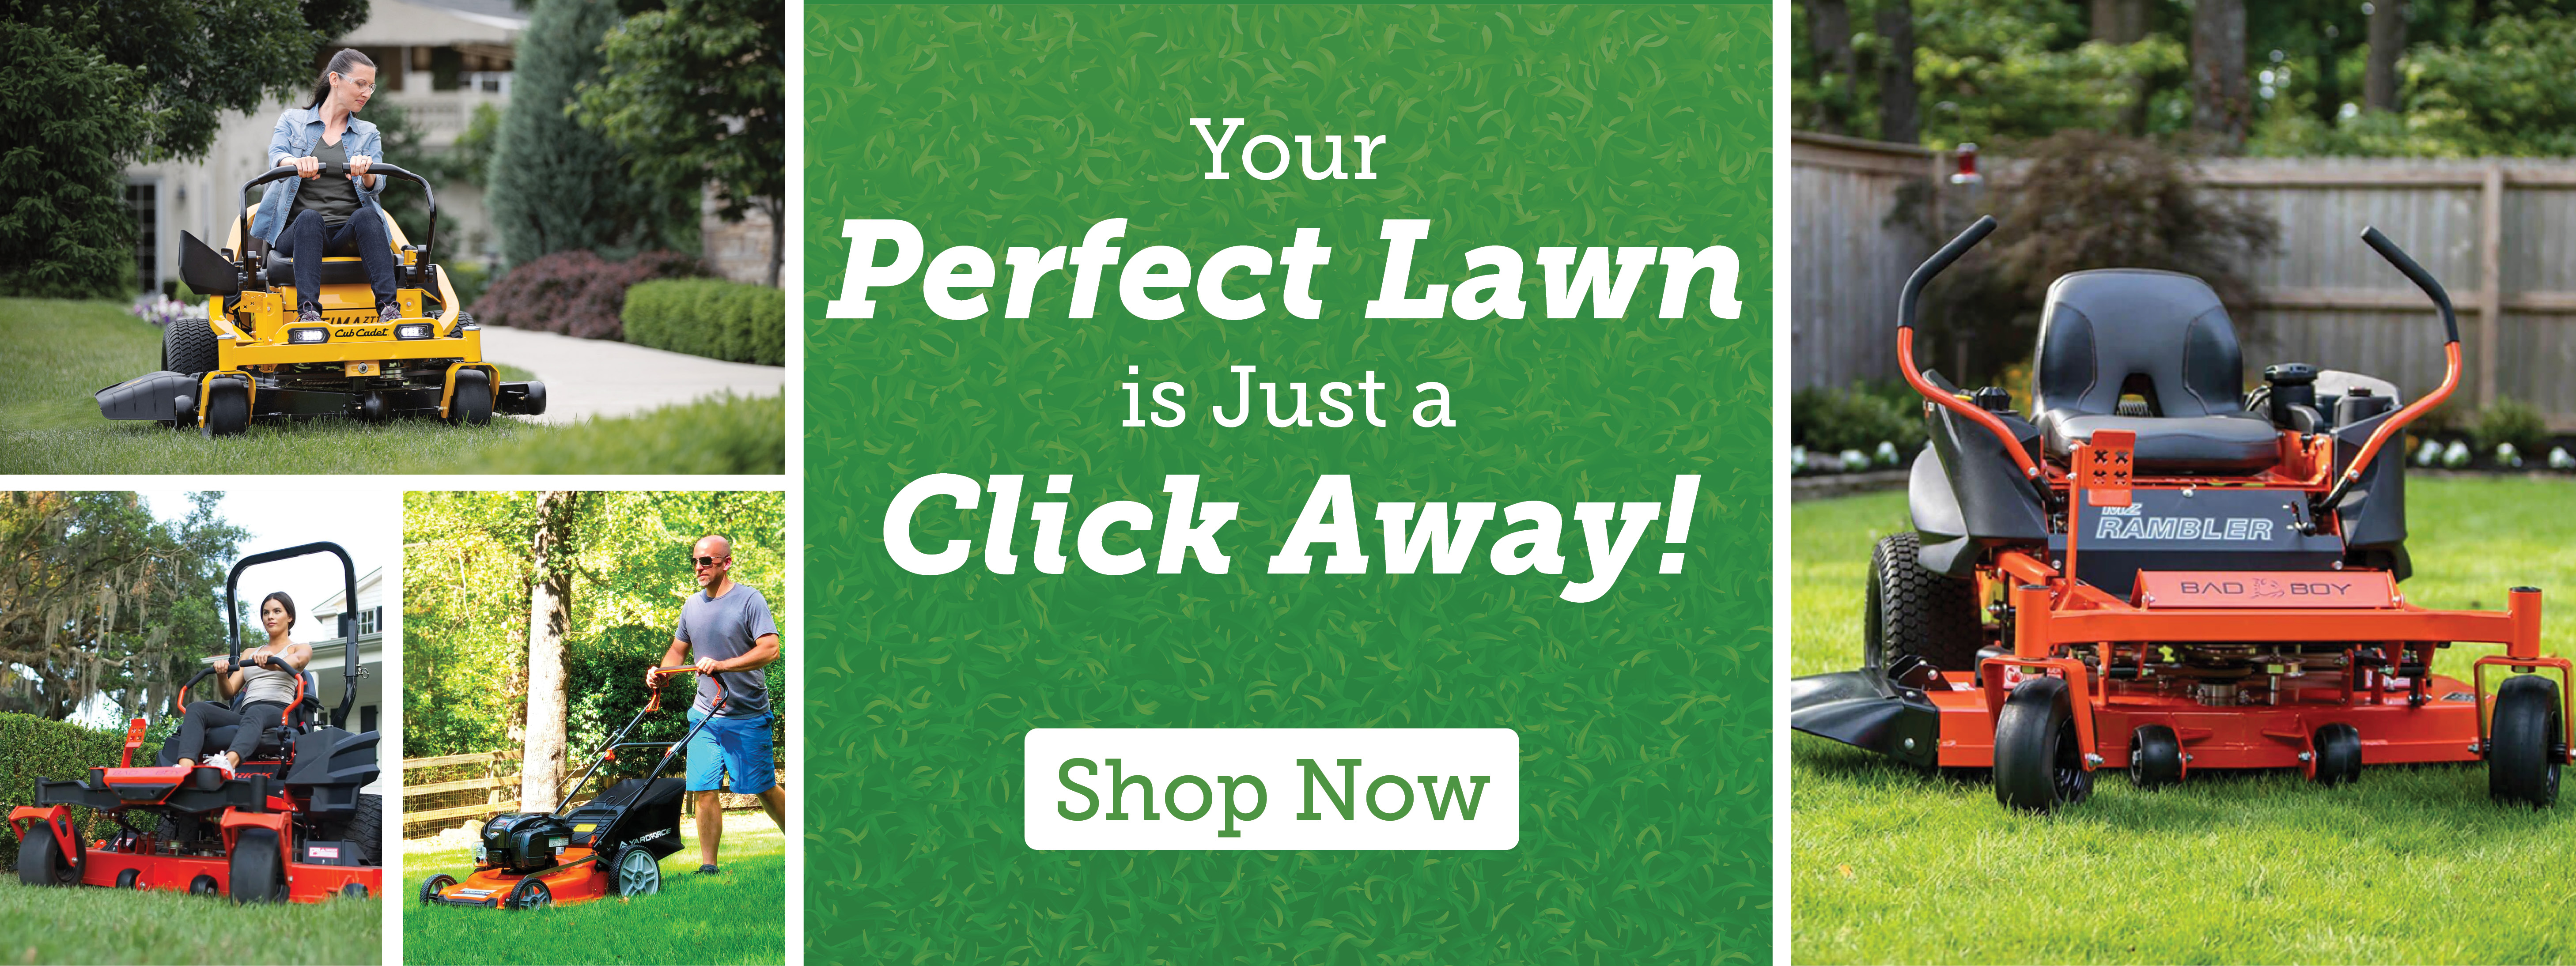 Your Perfect Lawn is just a Click Away